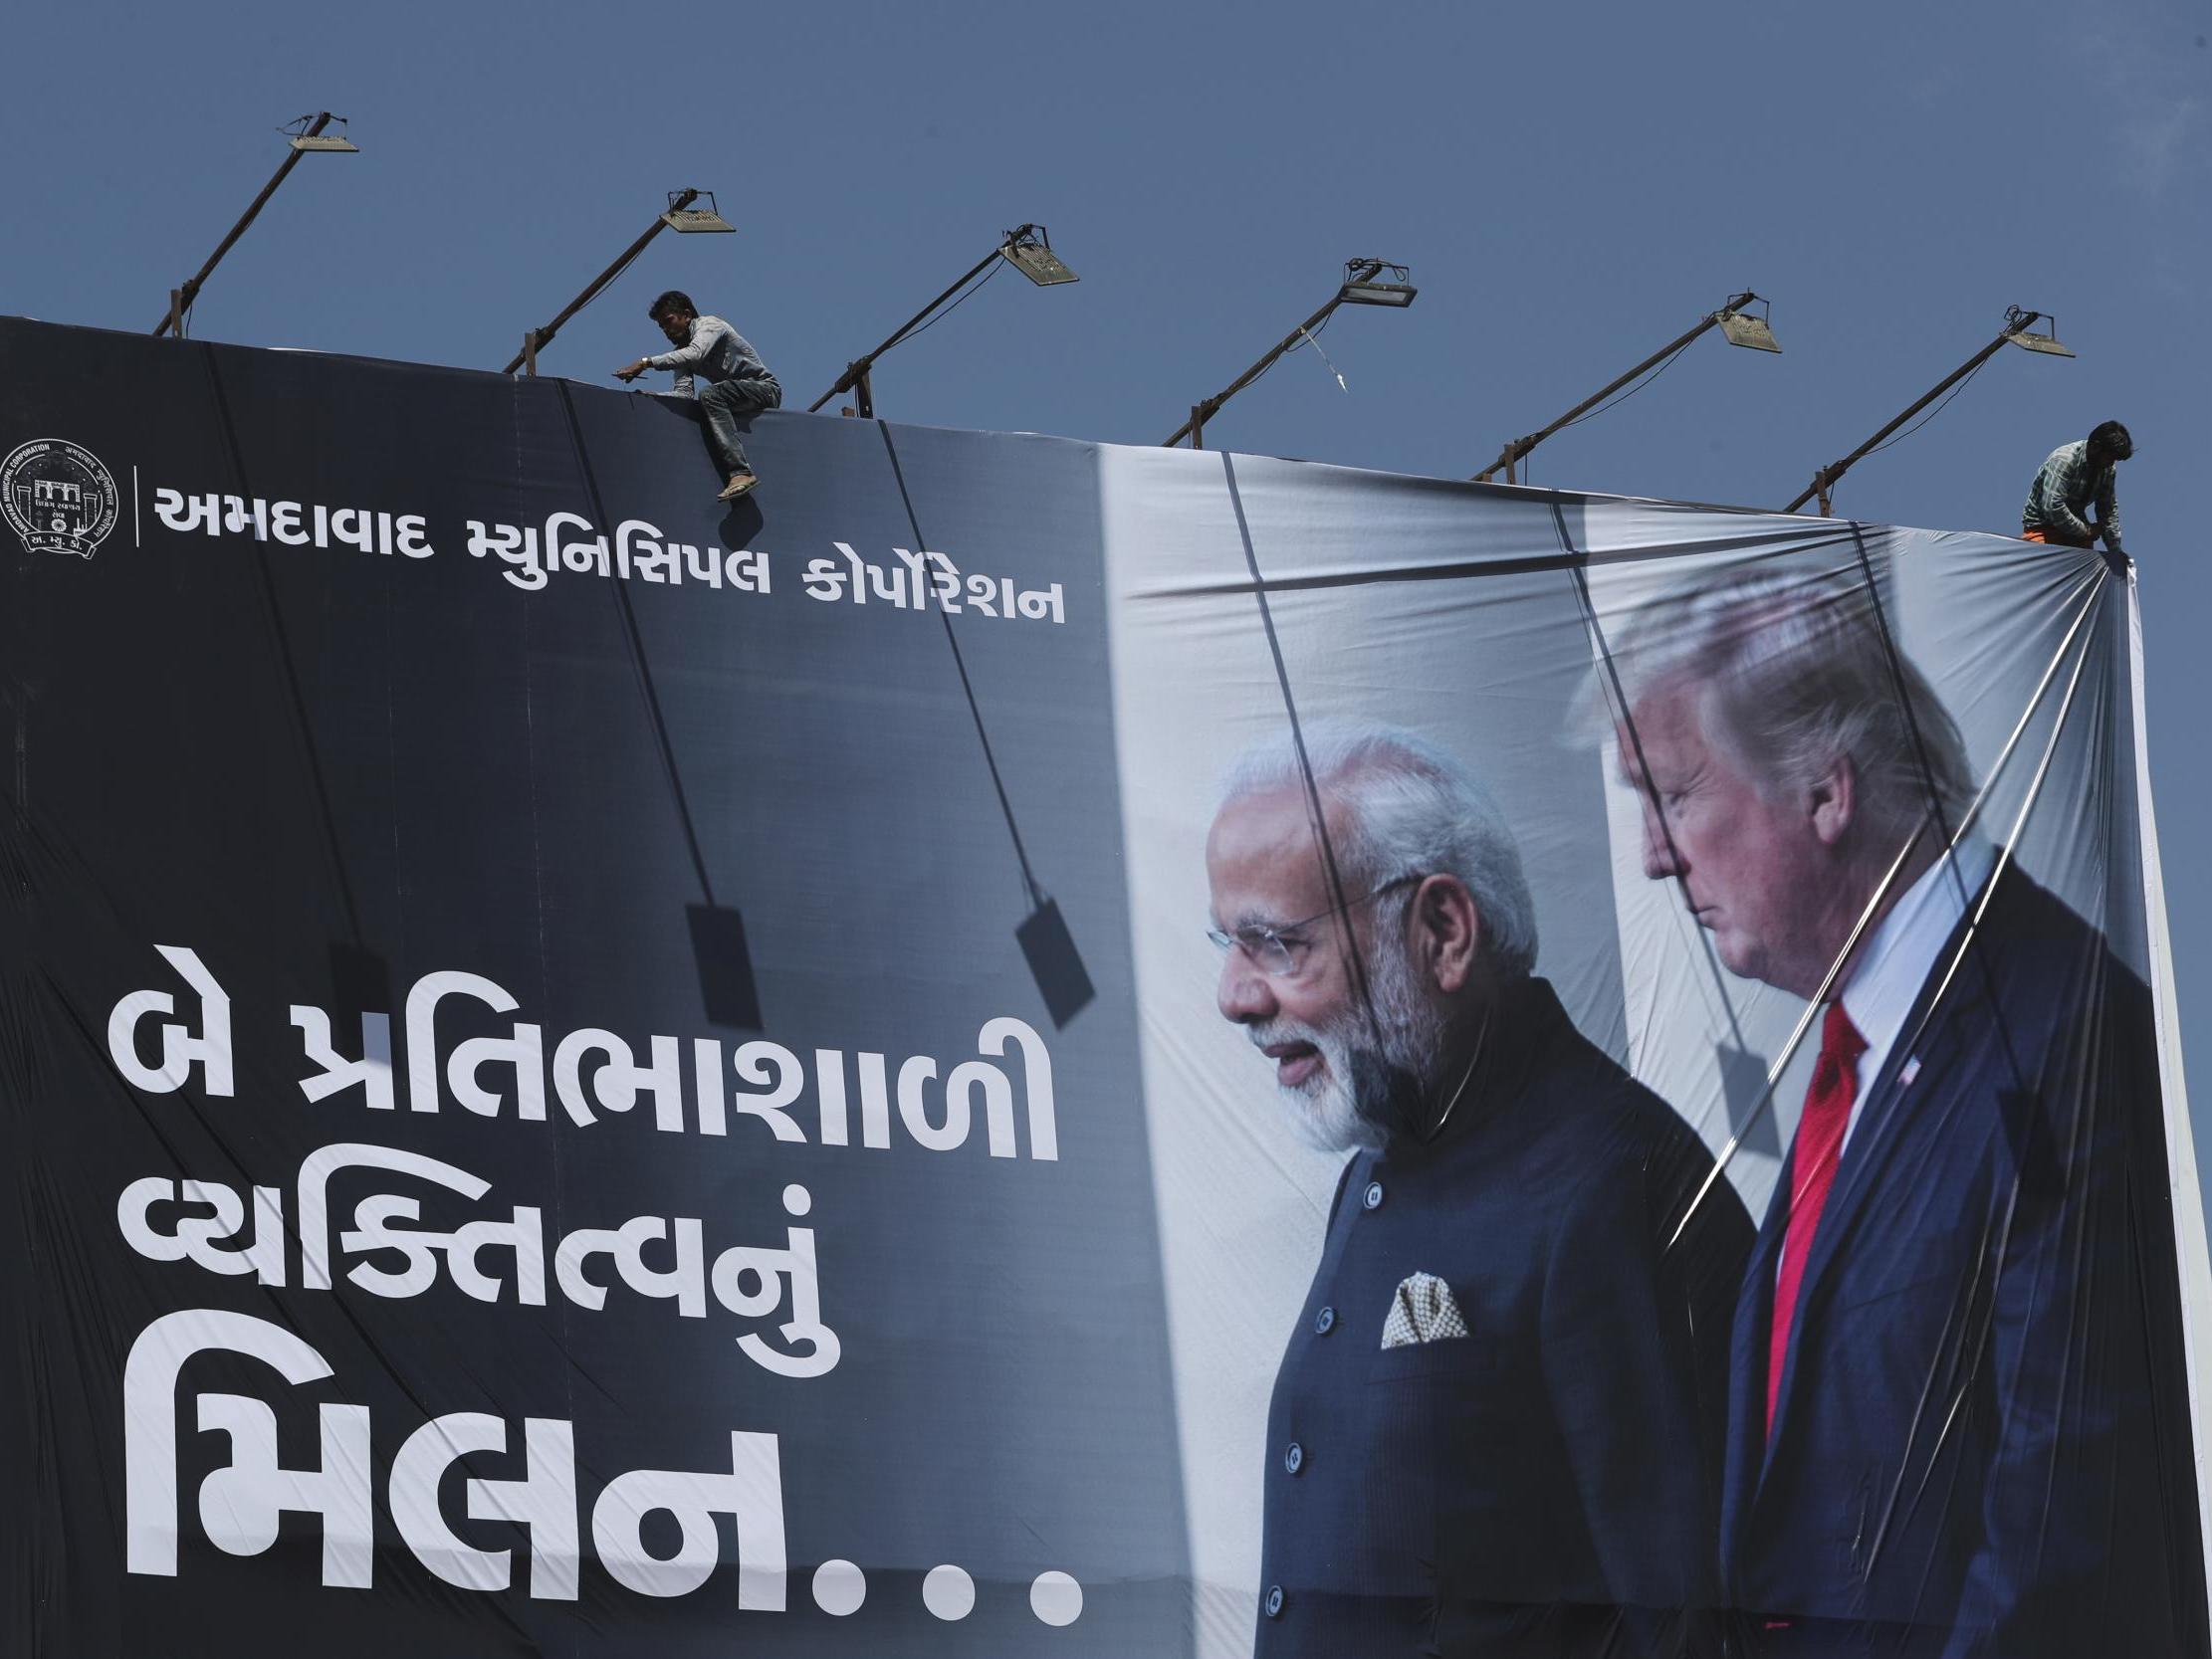 An Indian worker installs a giant hoarding welcoming US President Donald Trump ahead of his visit, in Ahmadabad, India